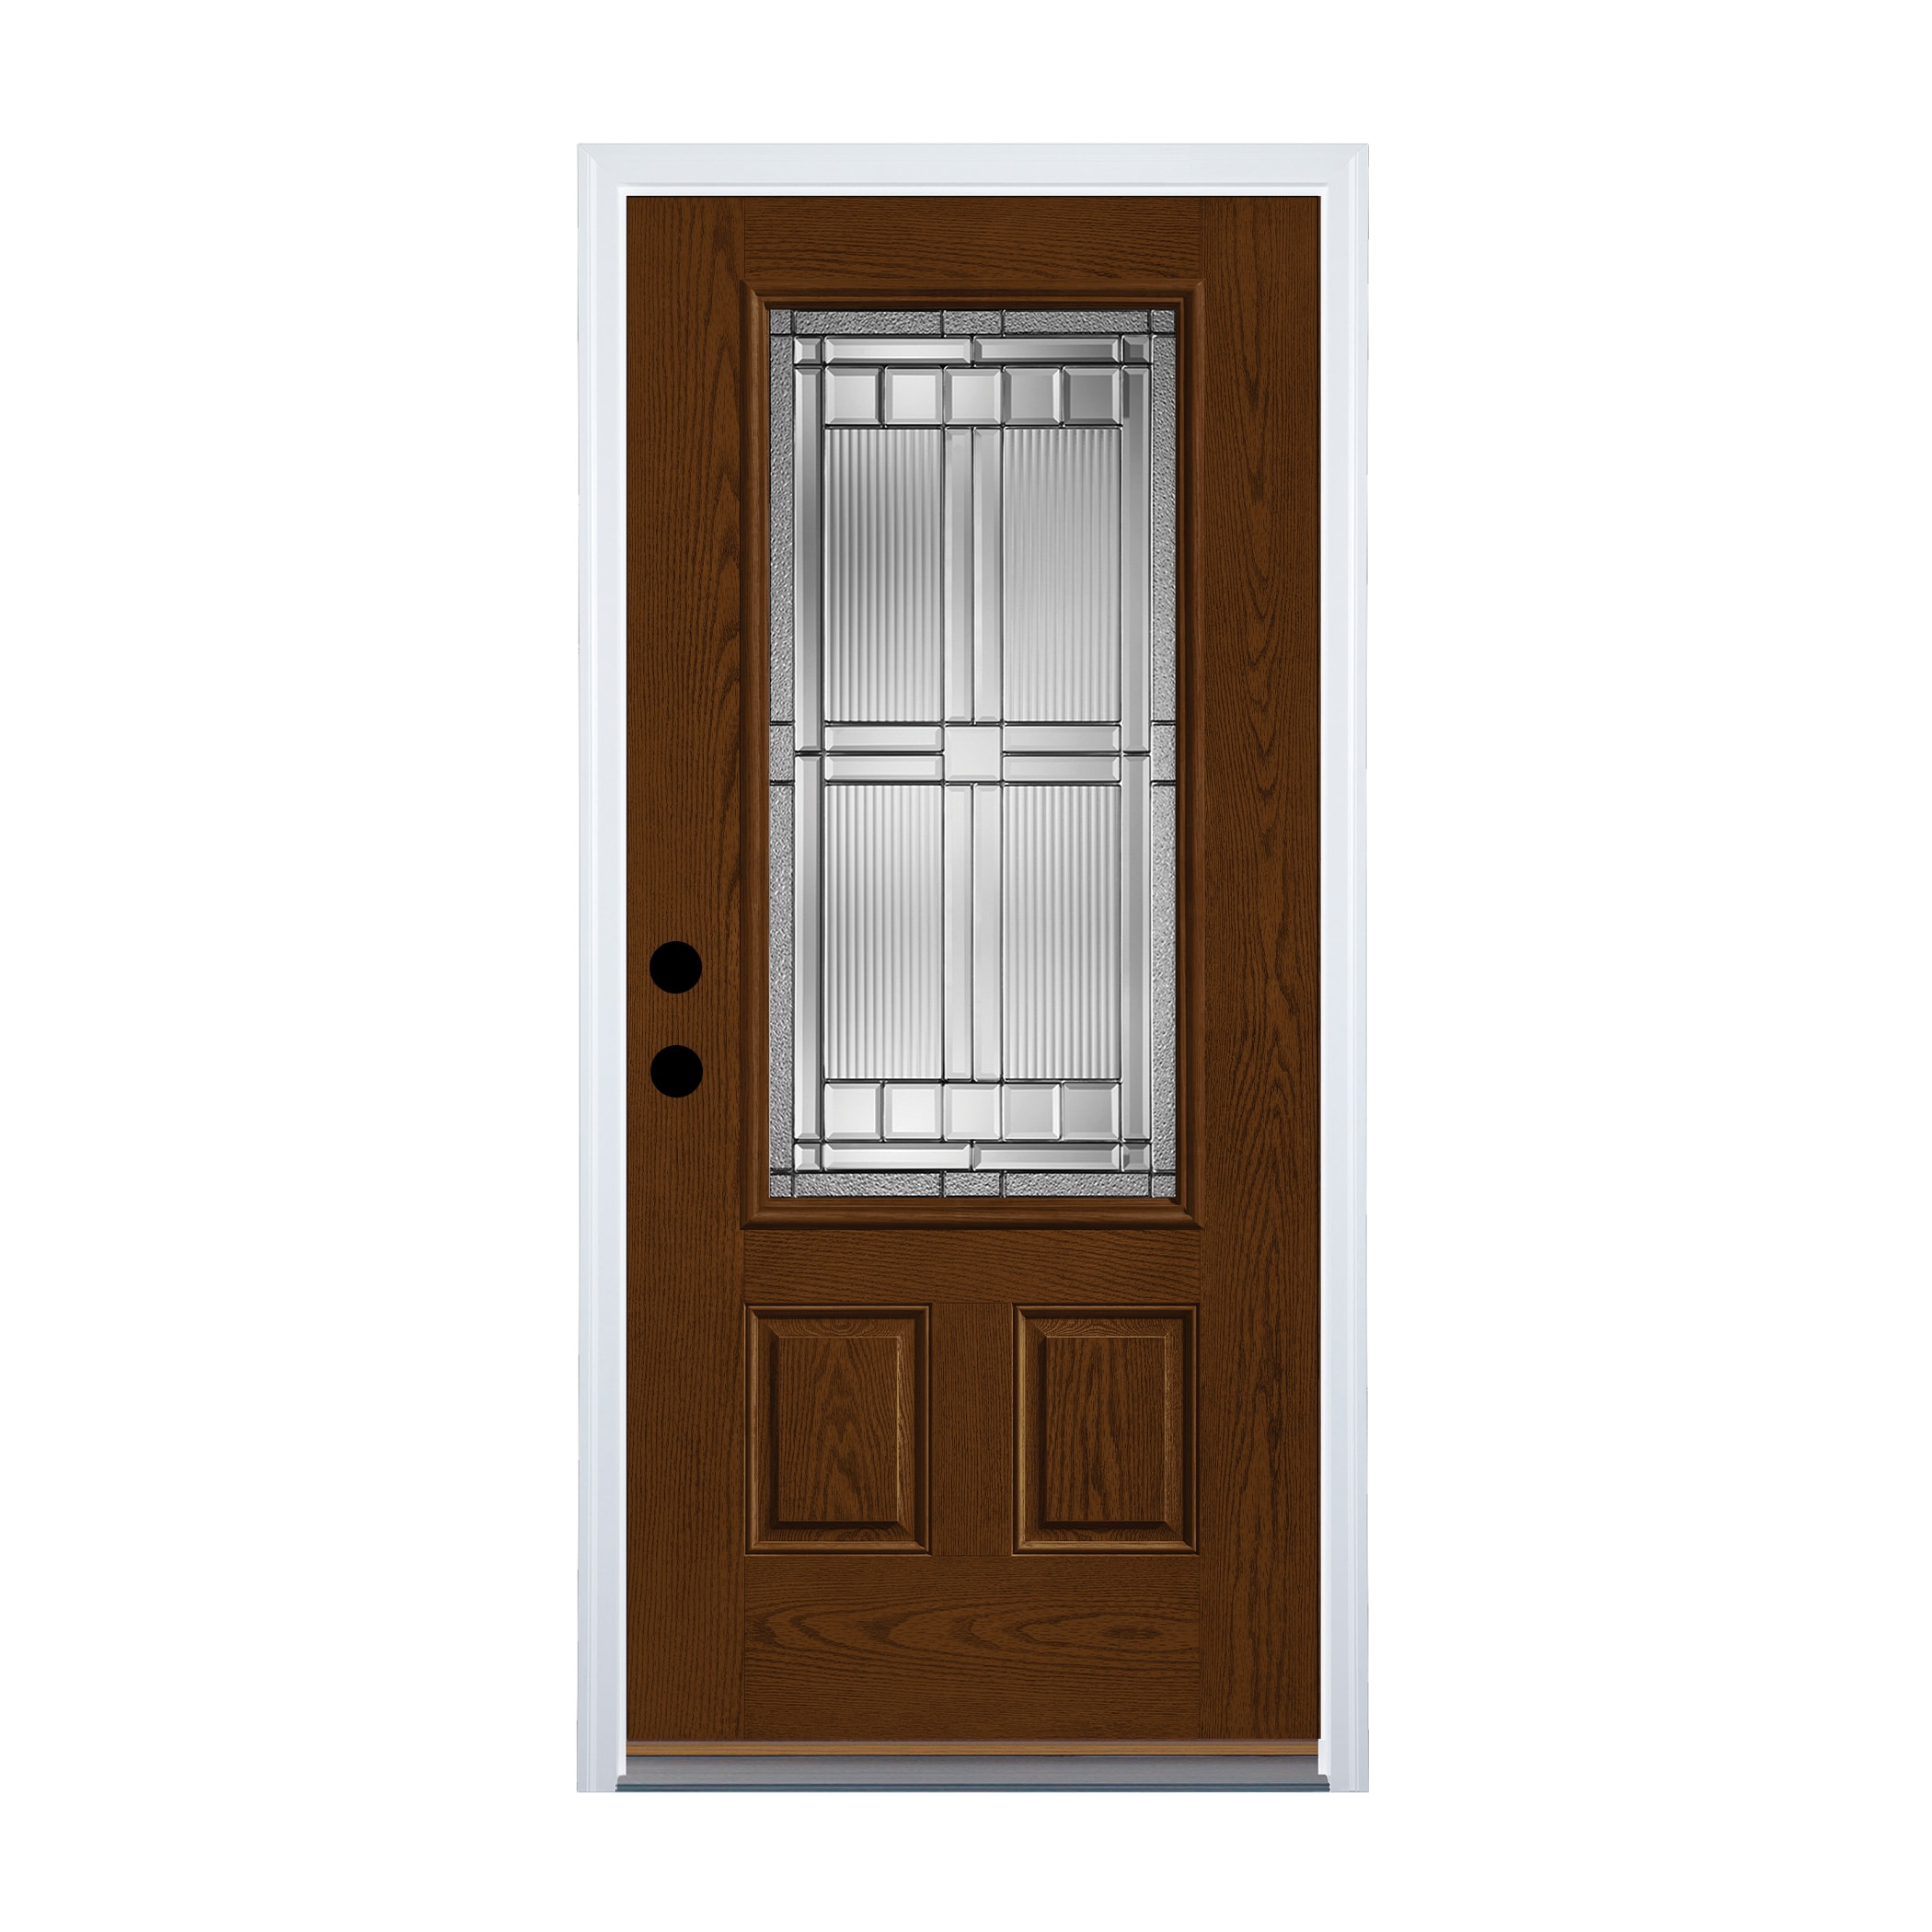 Fiberglass 3/4 Lite Left-Hand Outswing New Earth Stained Single Front Door with Brickmould Insulating Core in Brown/Tan | - Therma Tru FC776H-I-LON4-NE